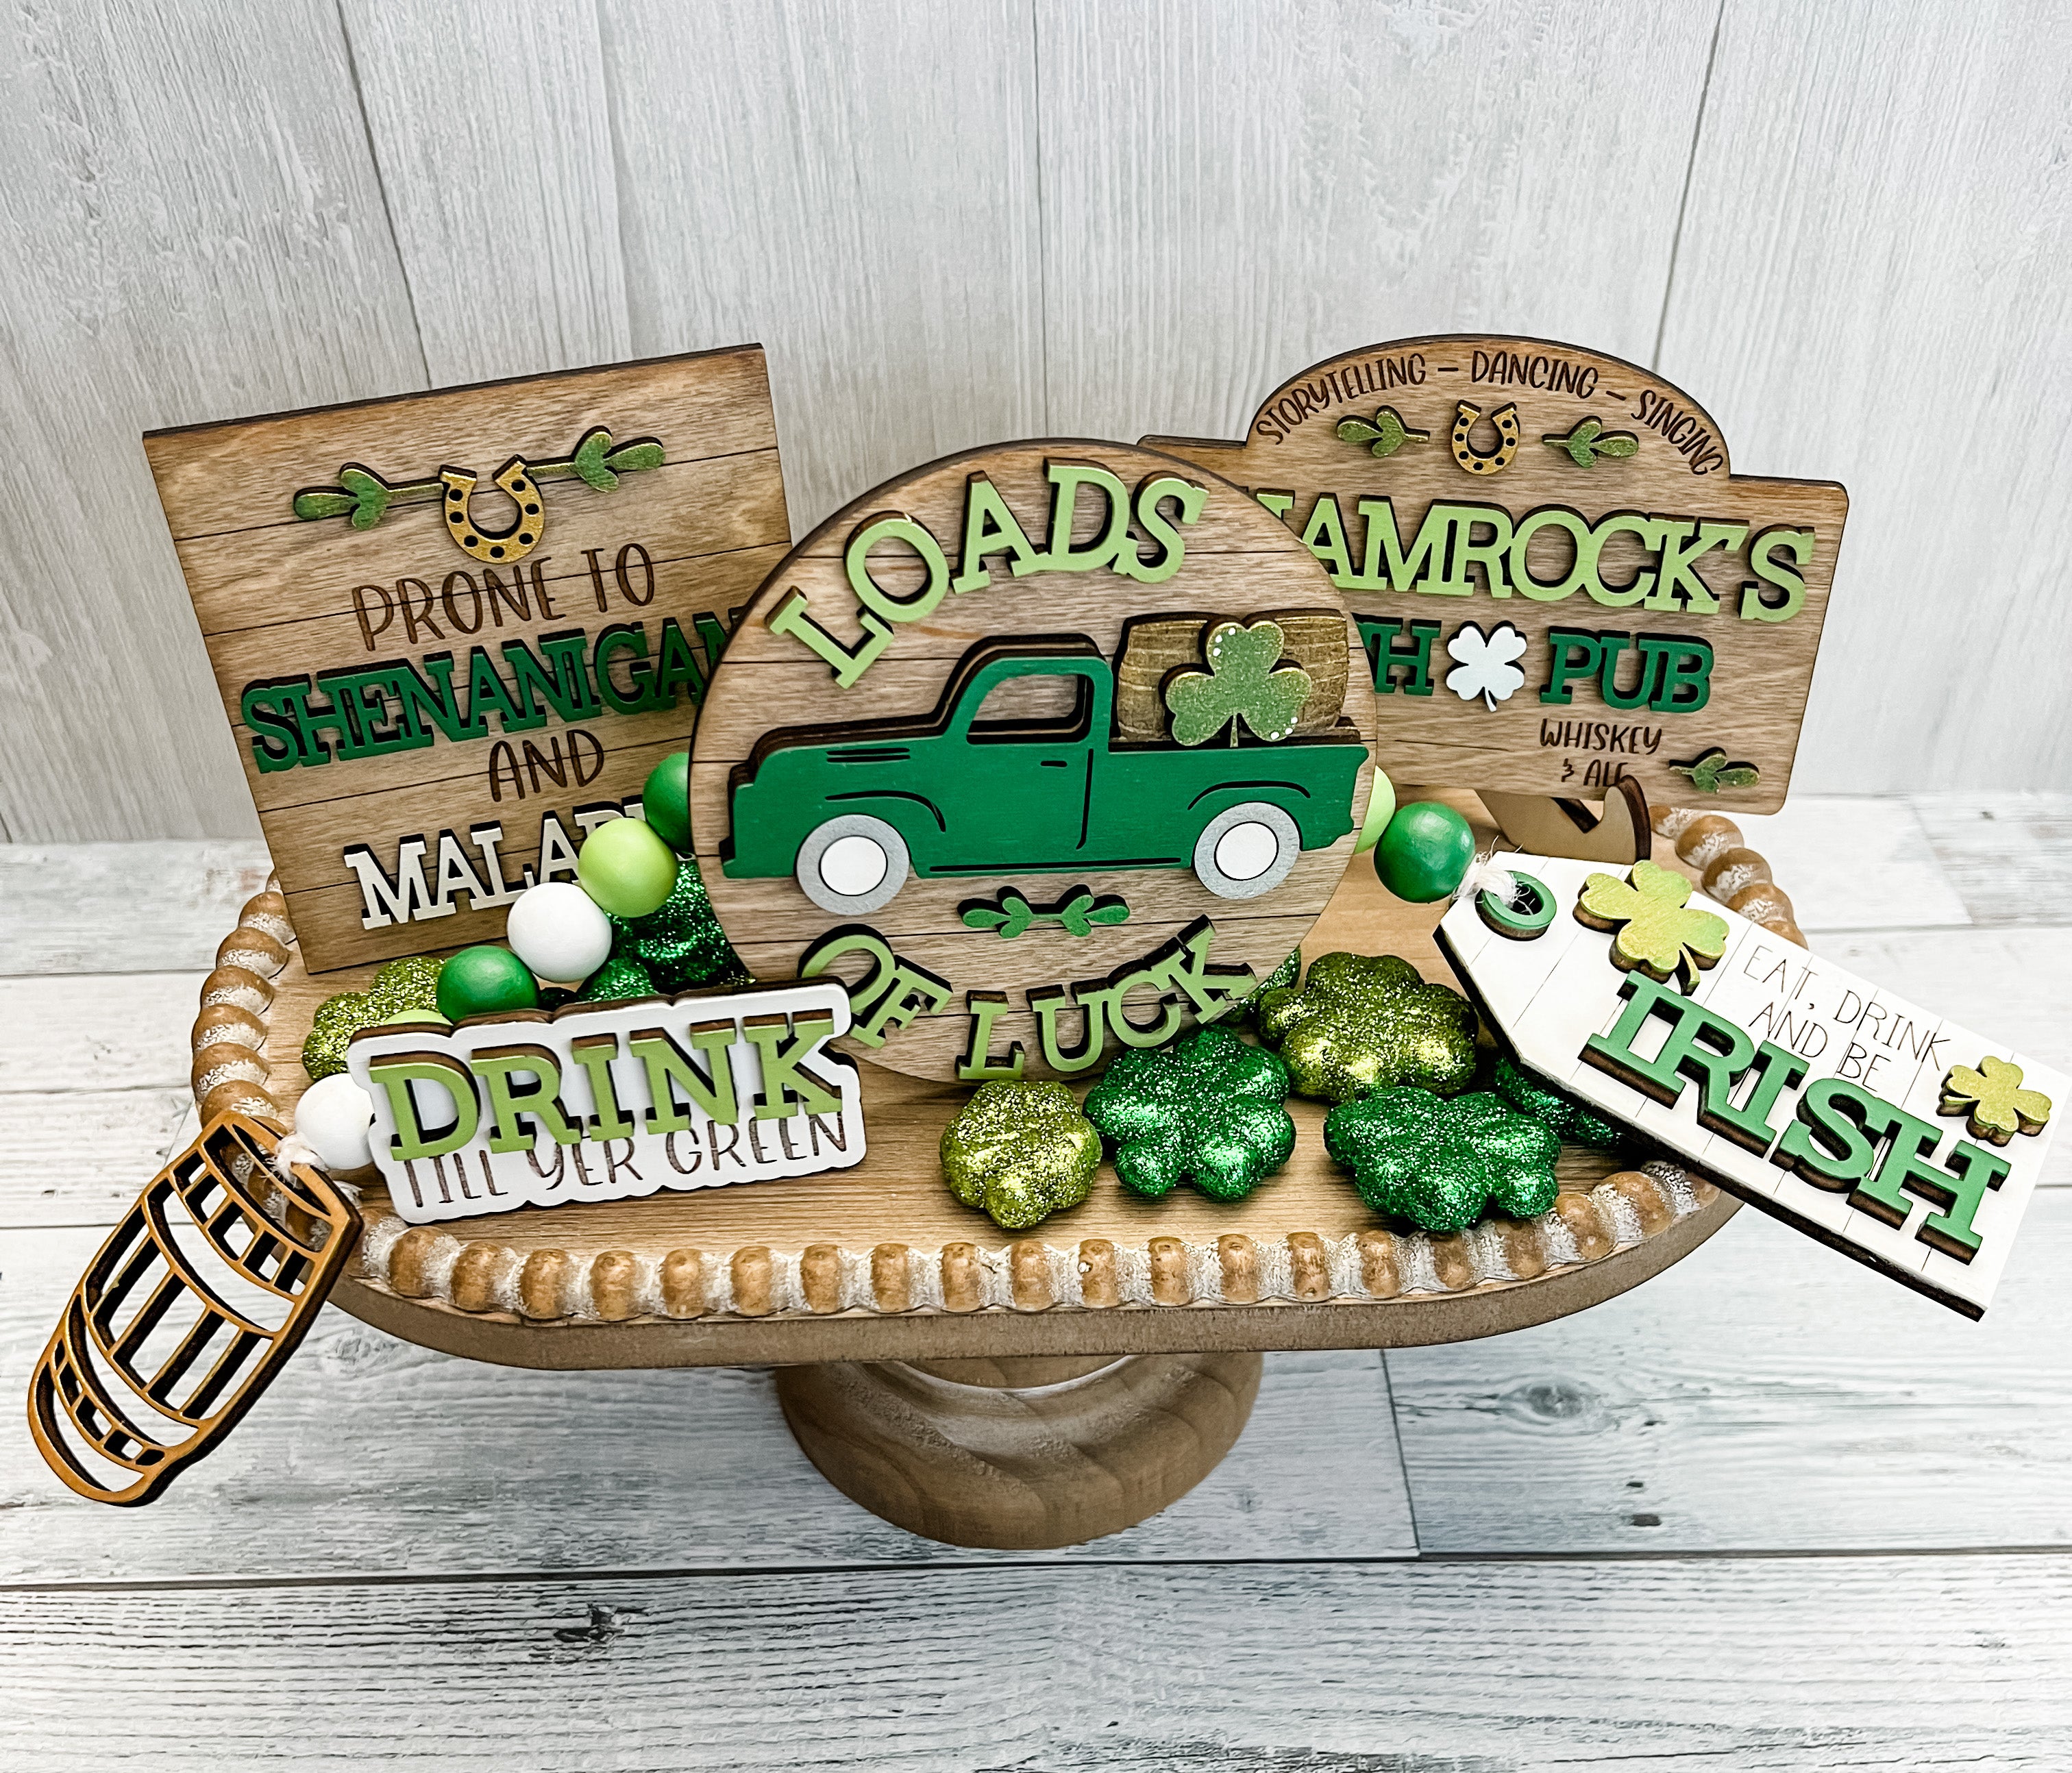 Loads of Luck St. Patrick’s Day Tier Tray DIY Kit